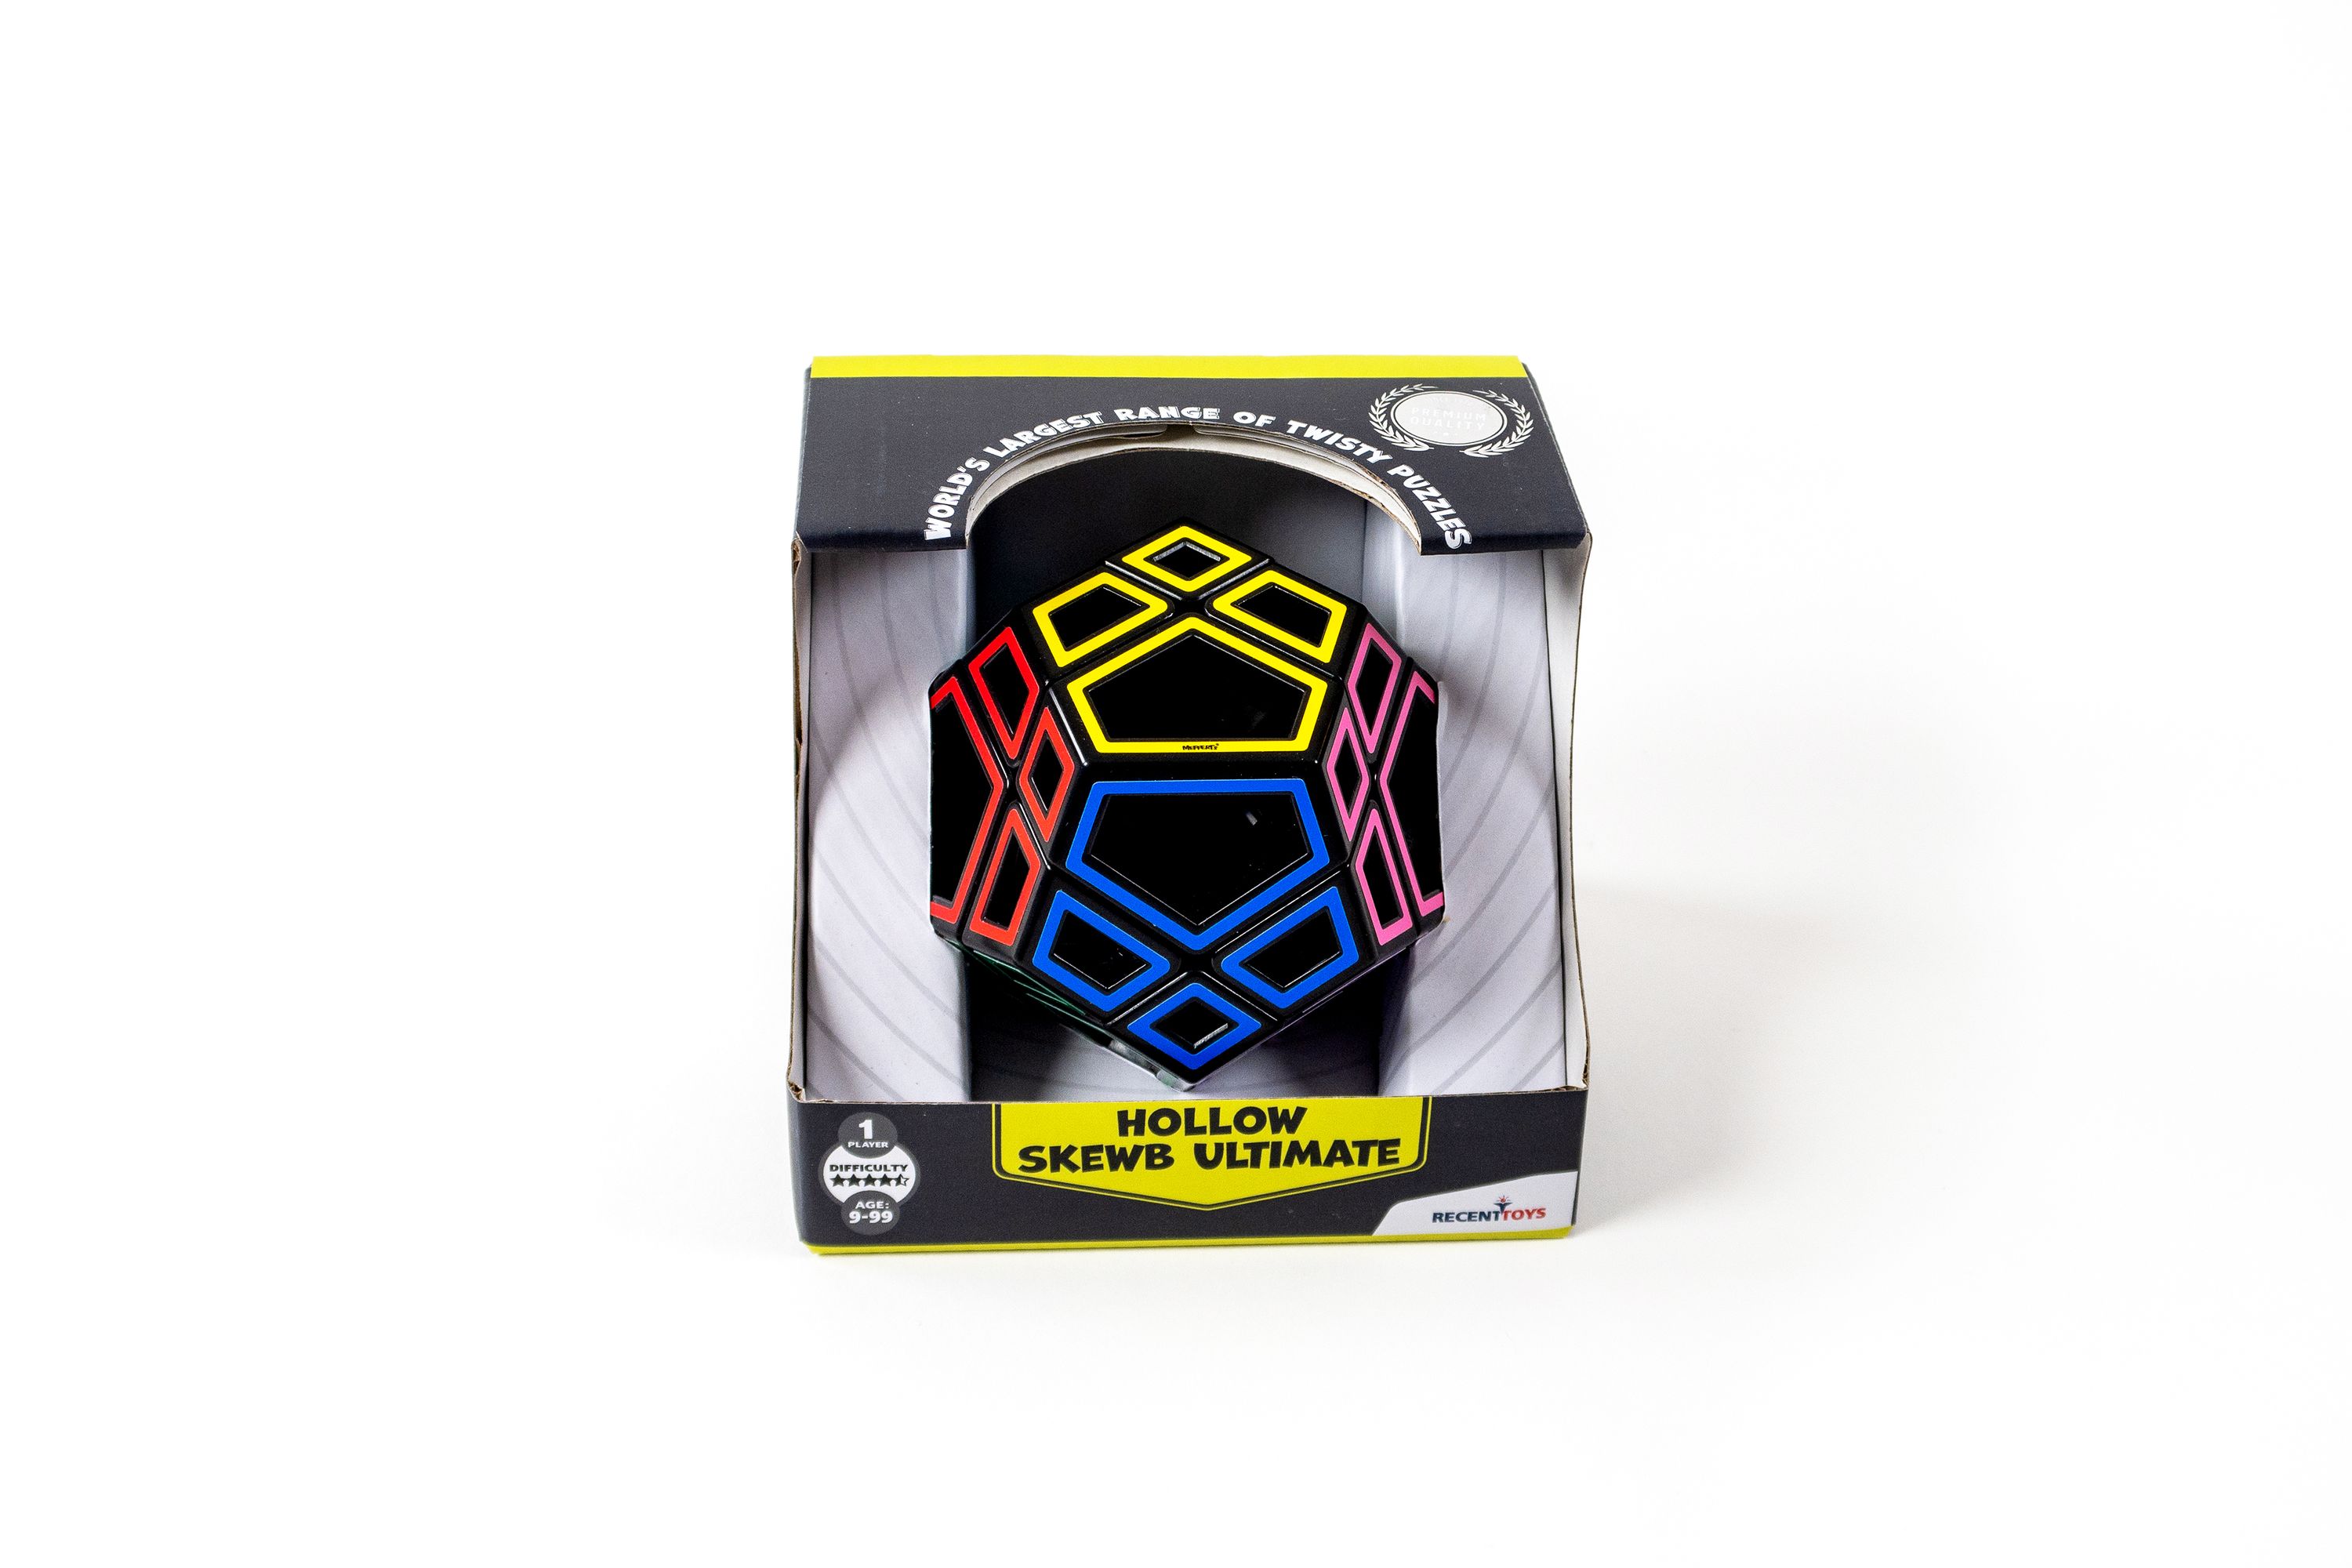 RECENT TOYS  Galvosūkis HOLLOW SKEWB ULTIMATE